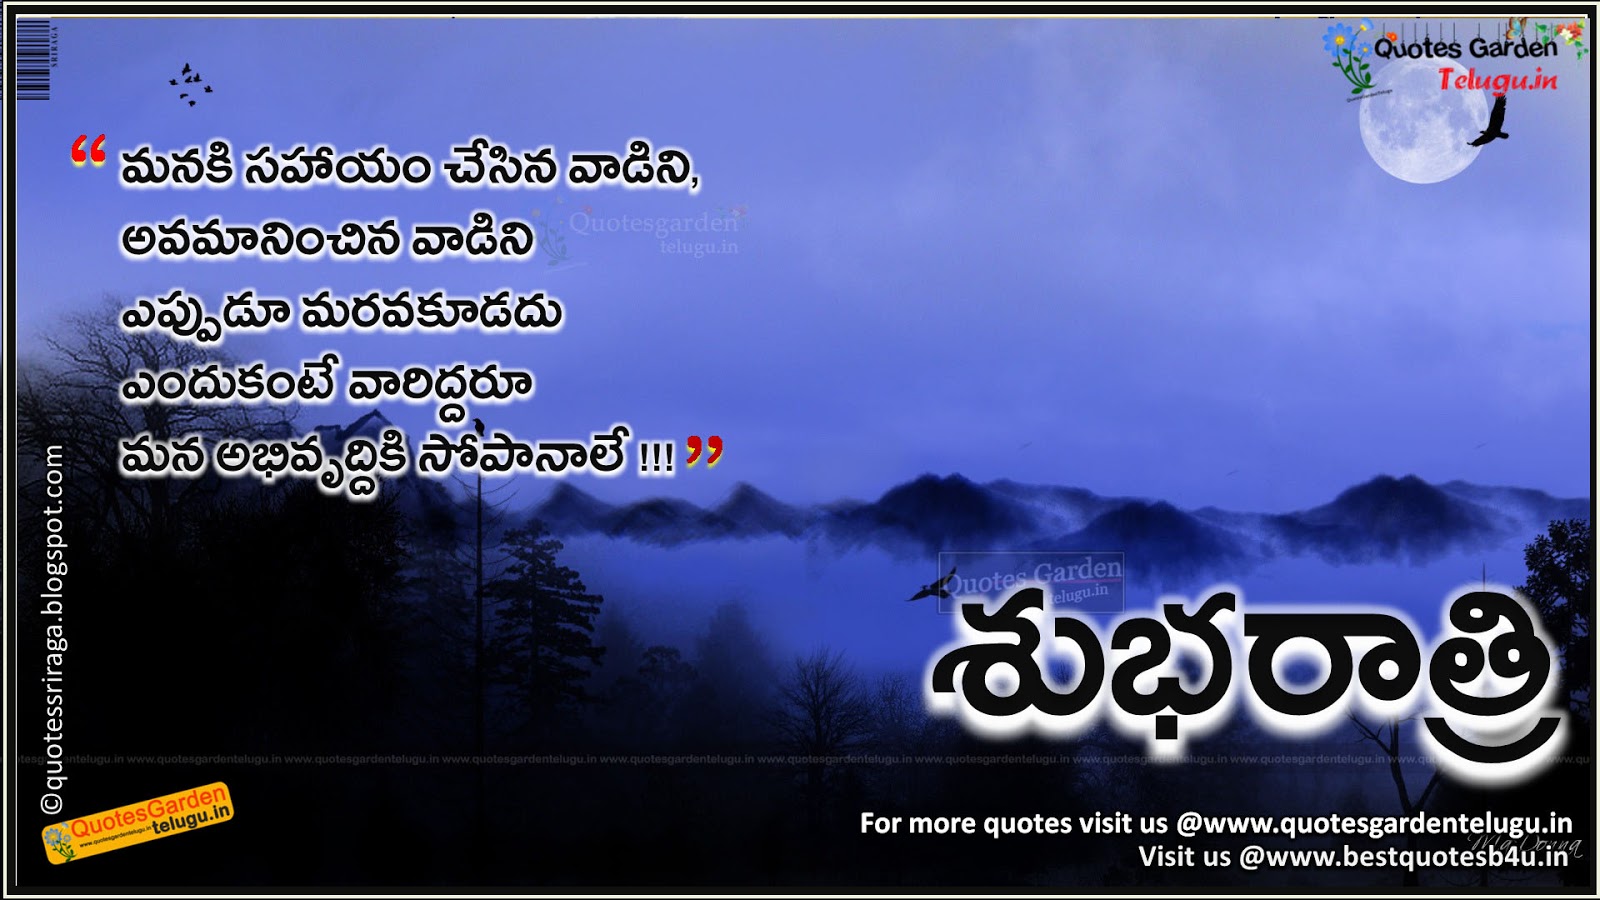 good night telugu quotes with life thoughts | QUOTES GARDEN TELUGU ...